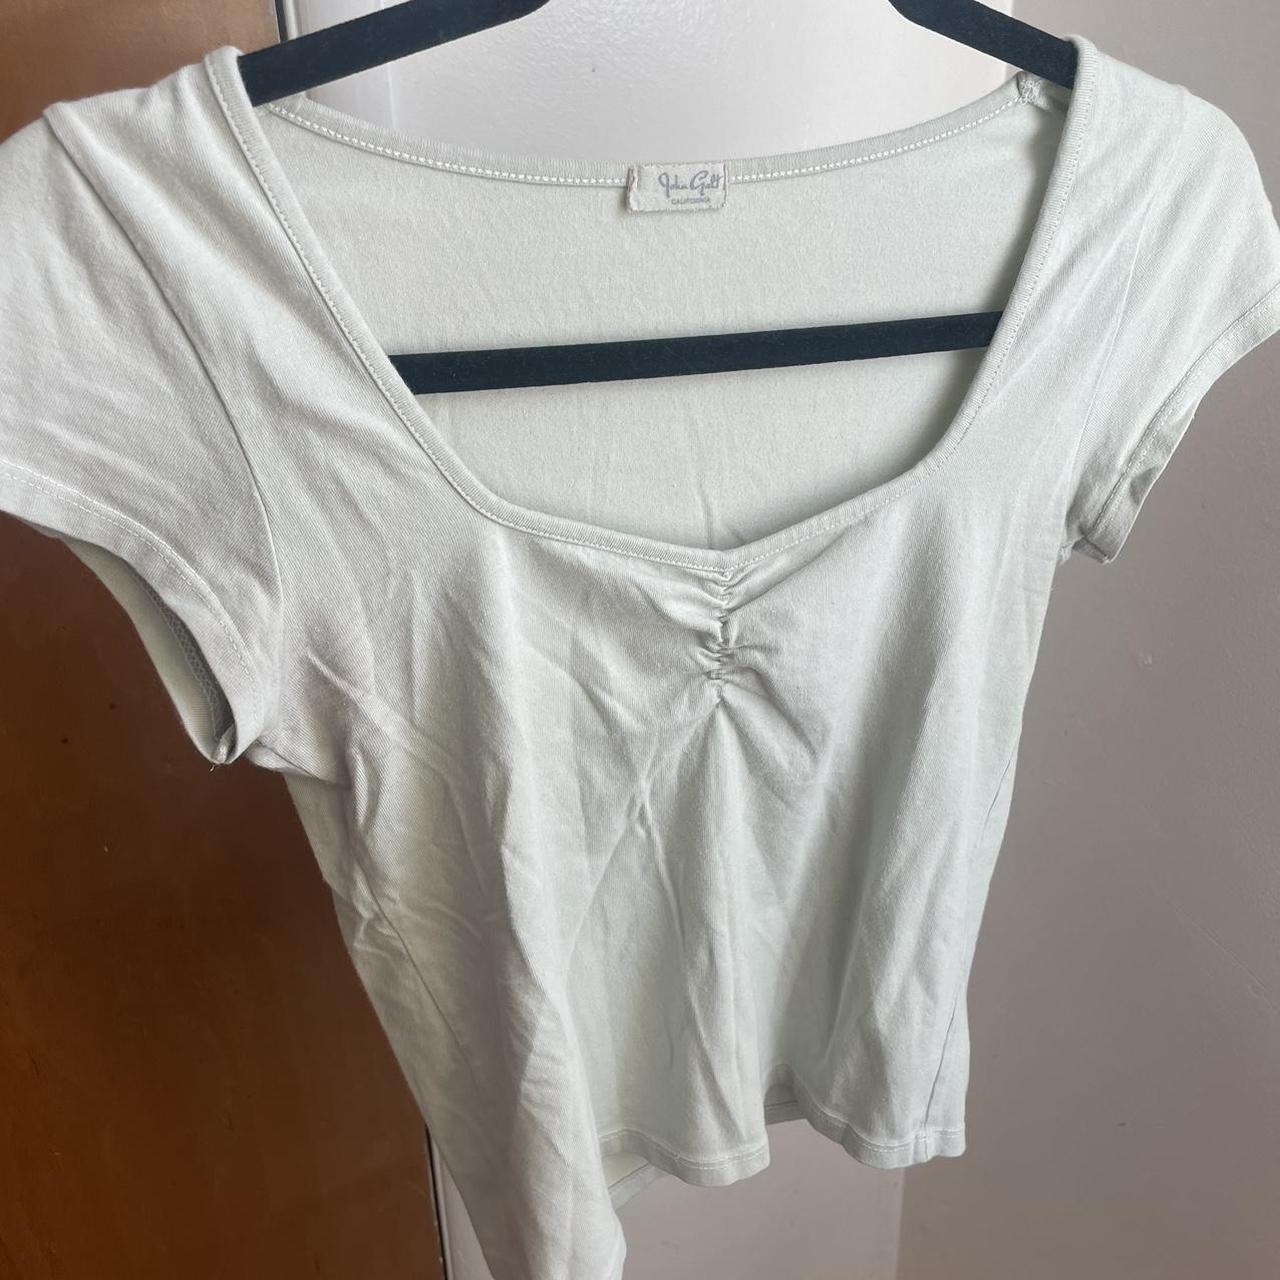 mable top from brandy melville｜TikTok Search